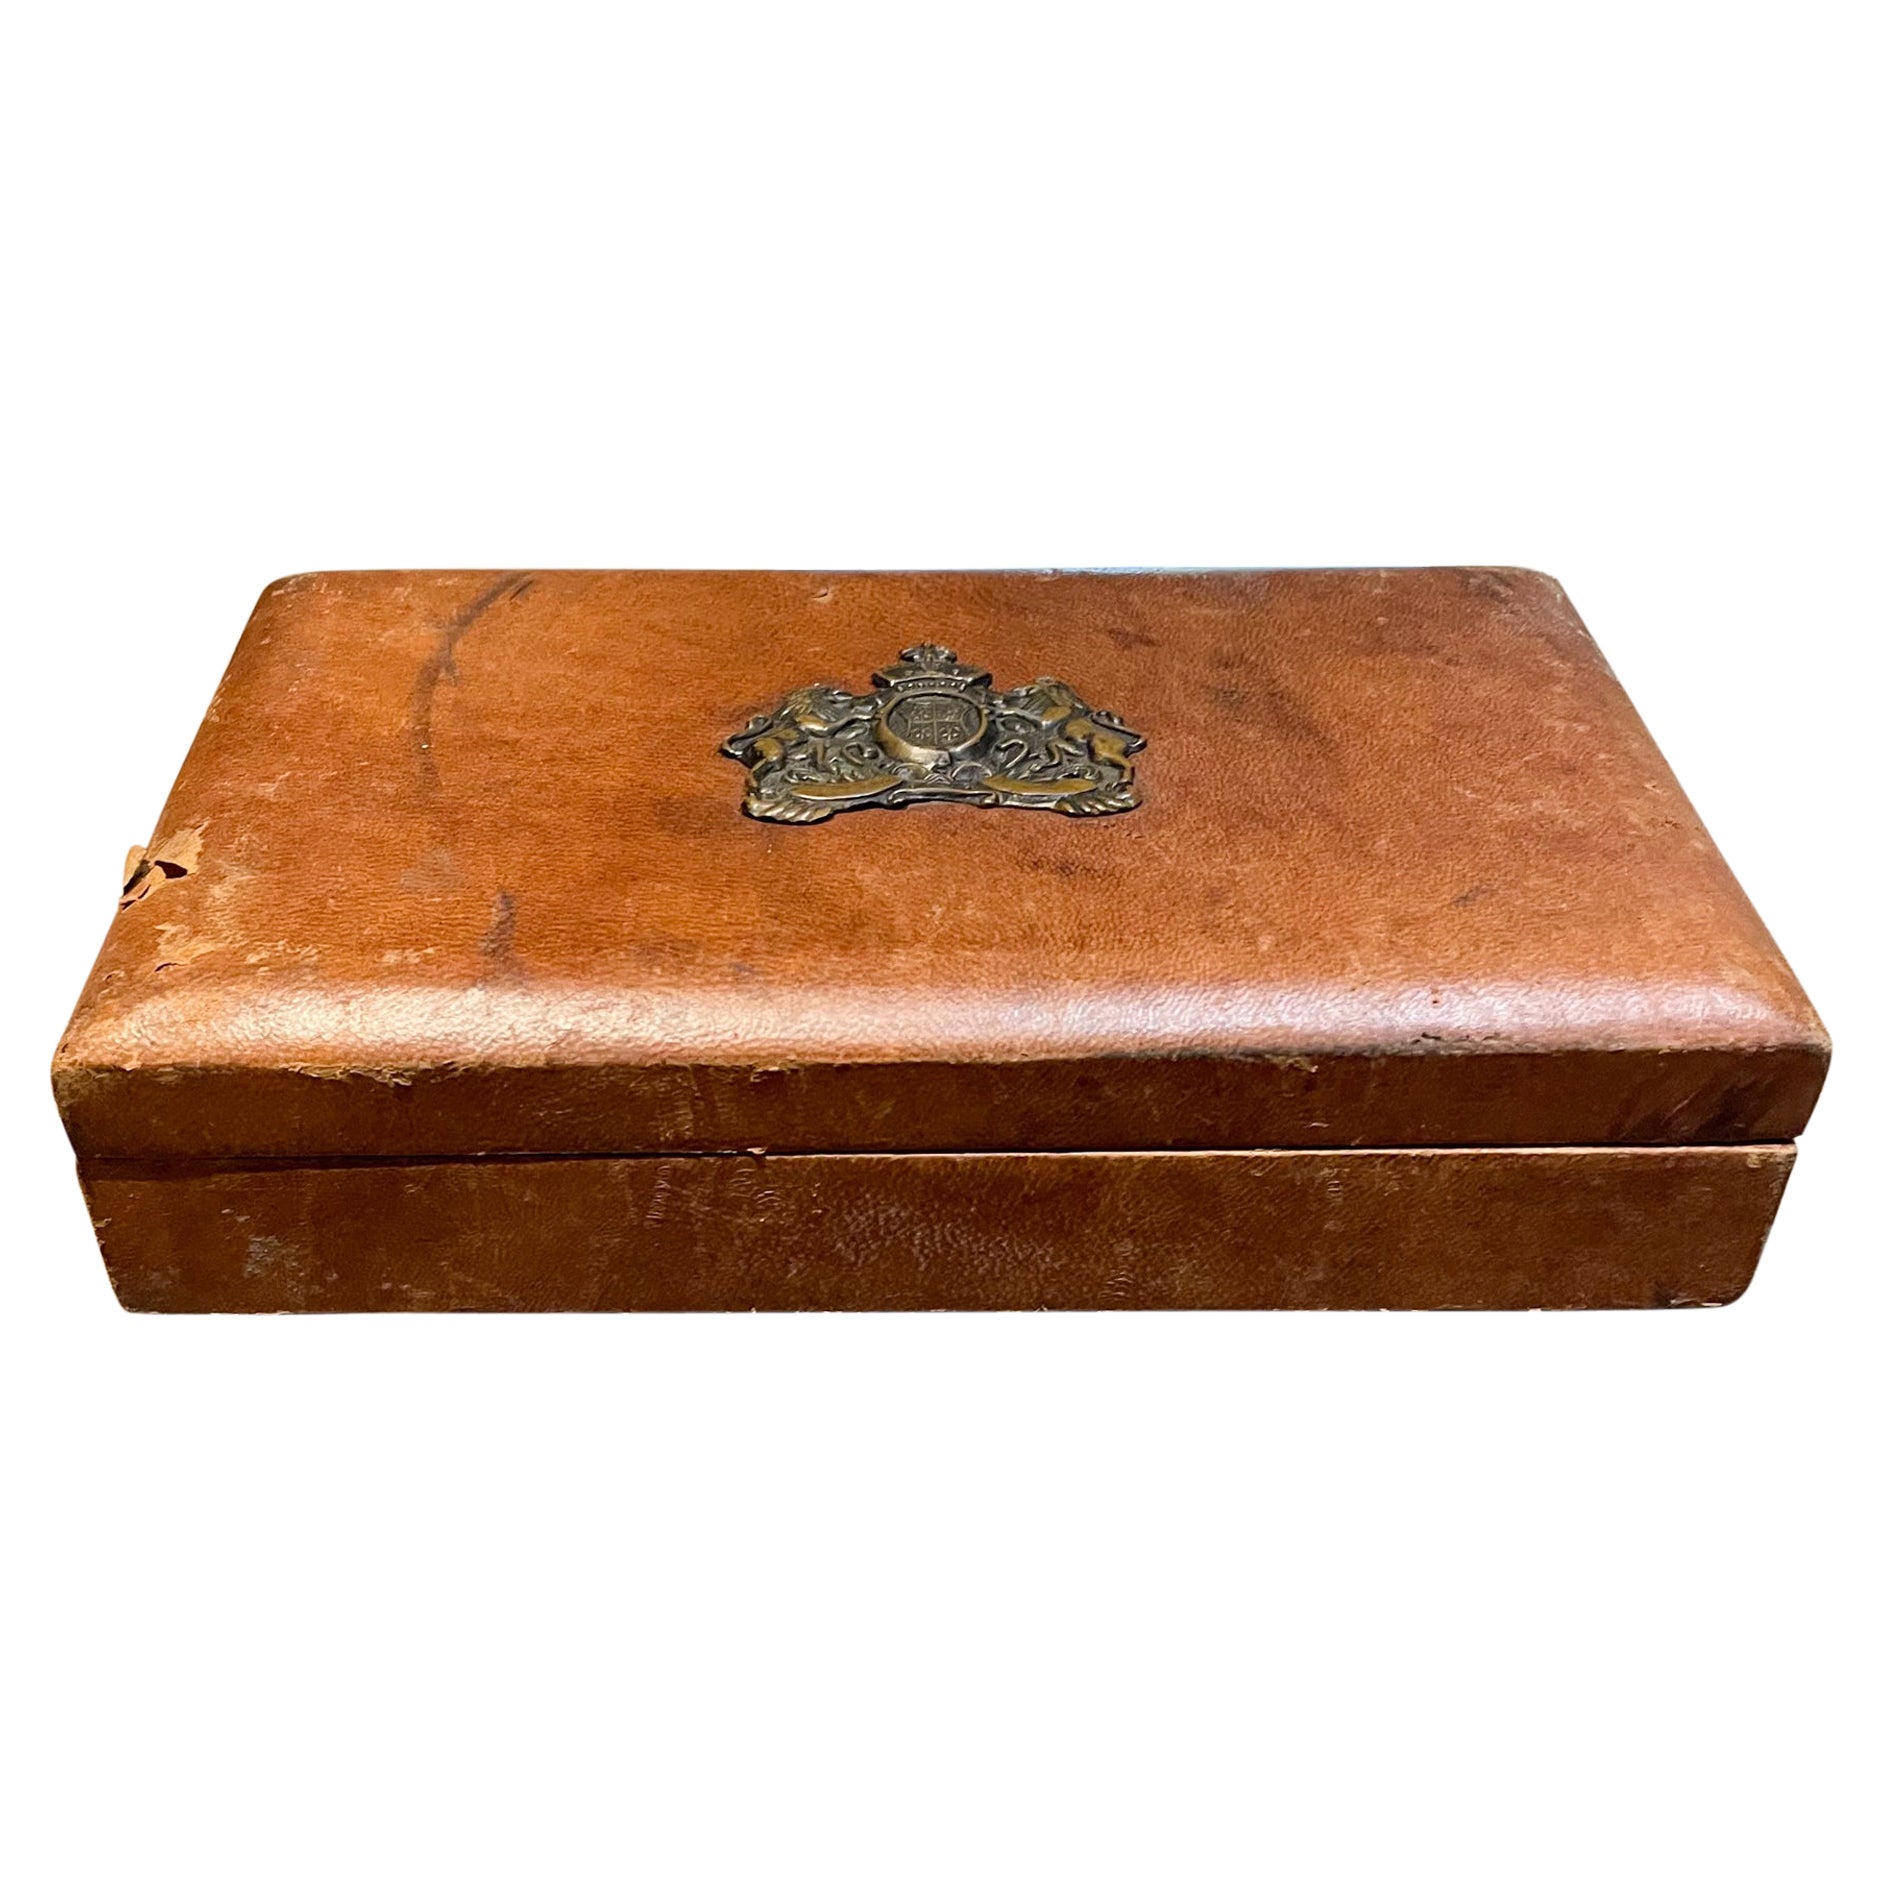 Medallion Adorned Distressed Leather Jewelry Box Vintage Midcentury Mexico 1970s